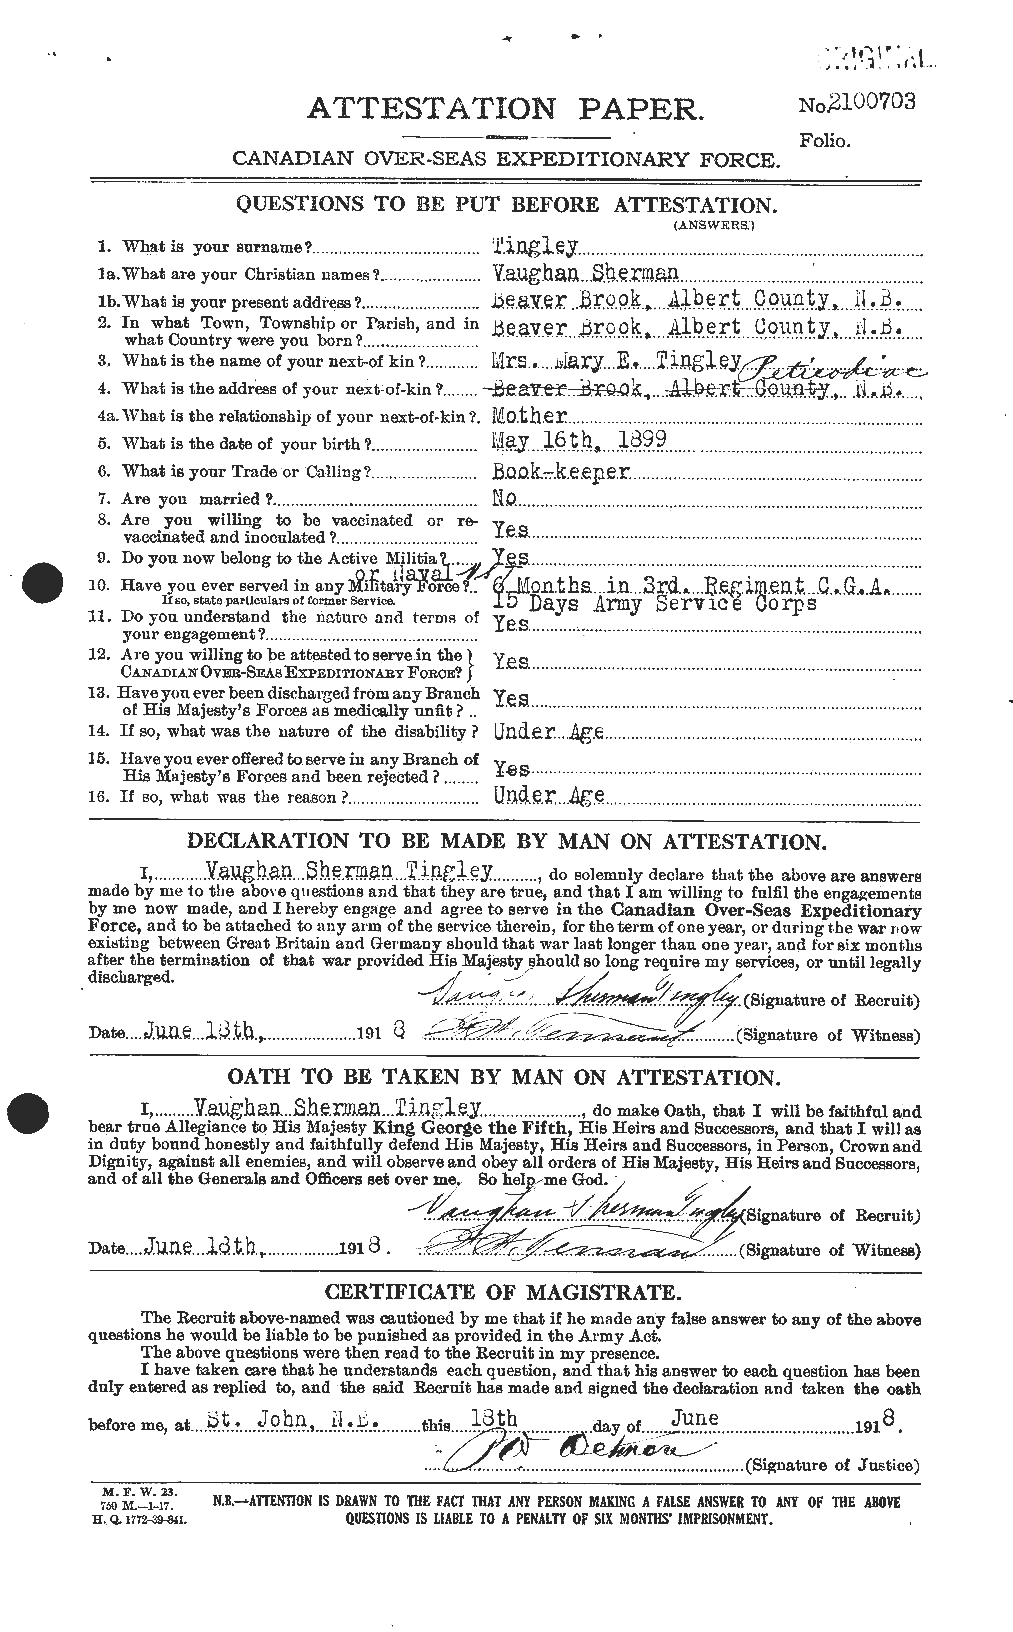 Personnel Records of the First World War - CEF 634635a